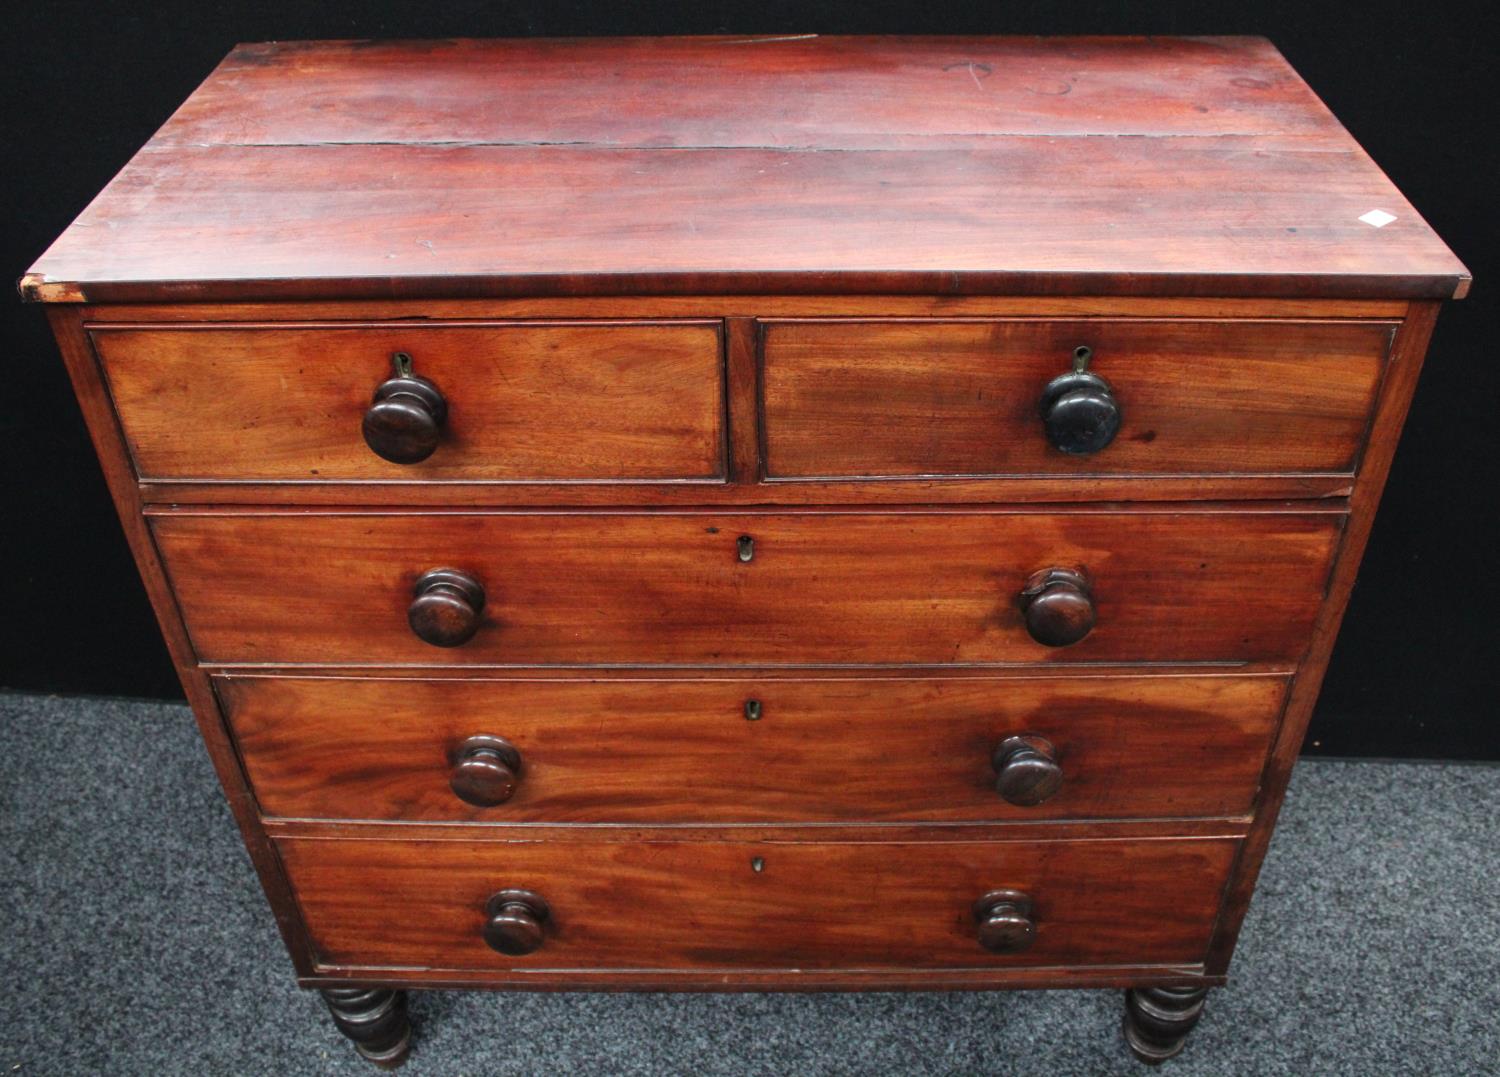 An early Victorian mahogany chest of drawers, c. - Image 7 of 7